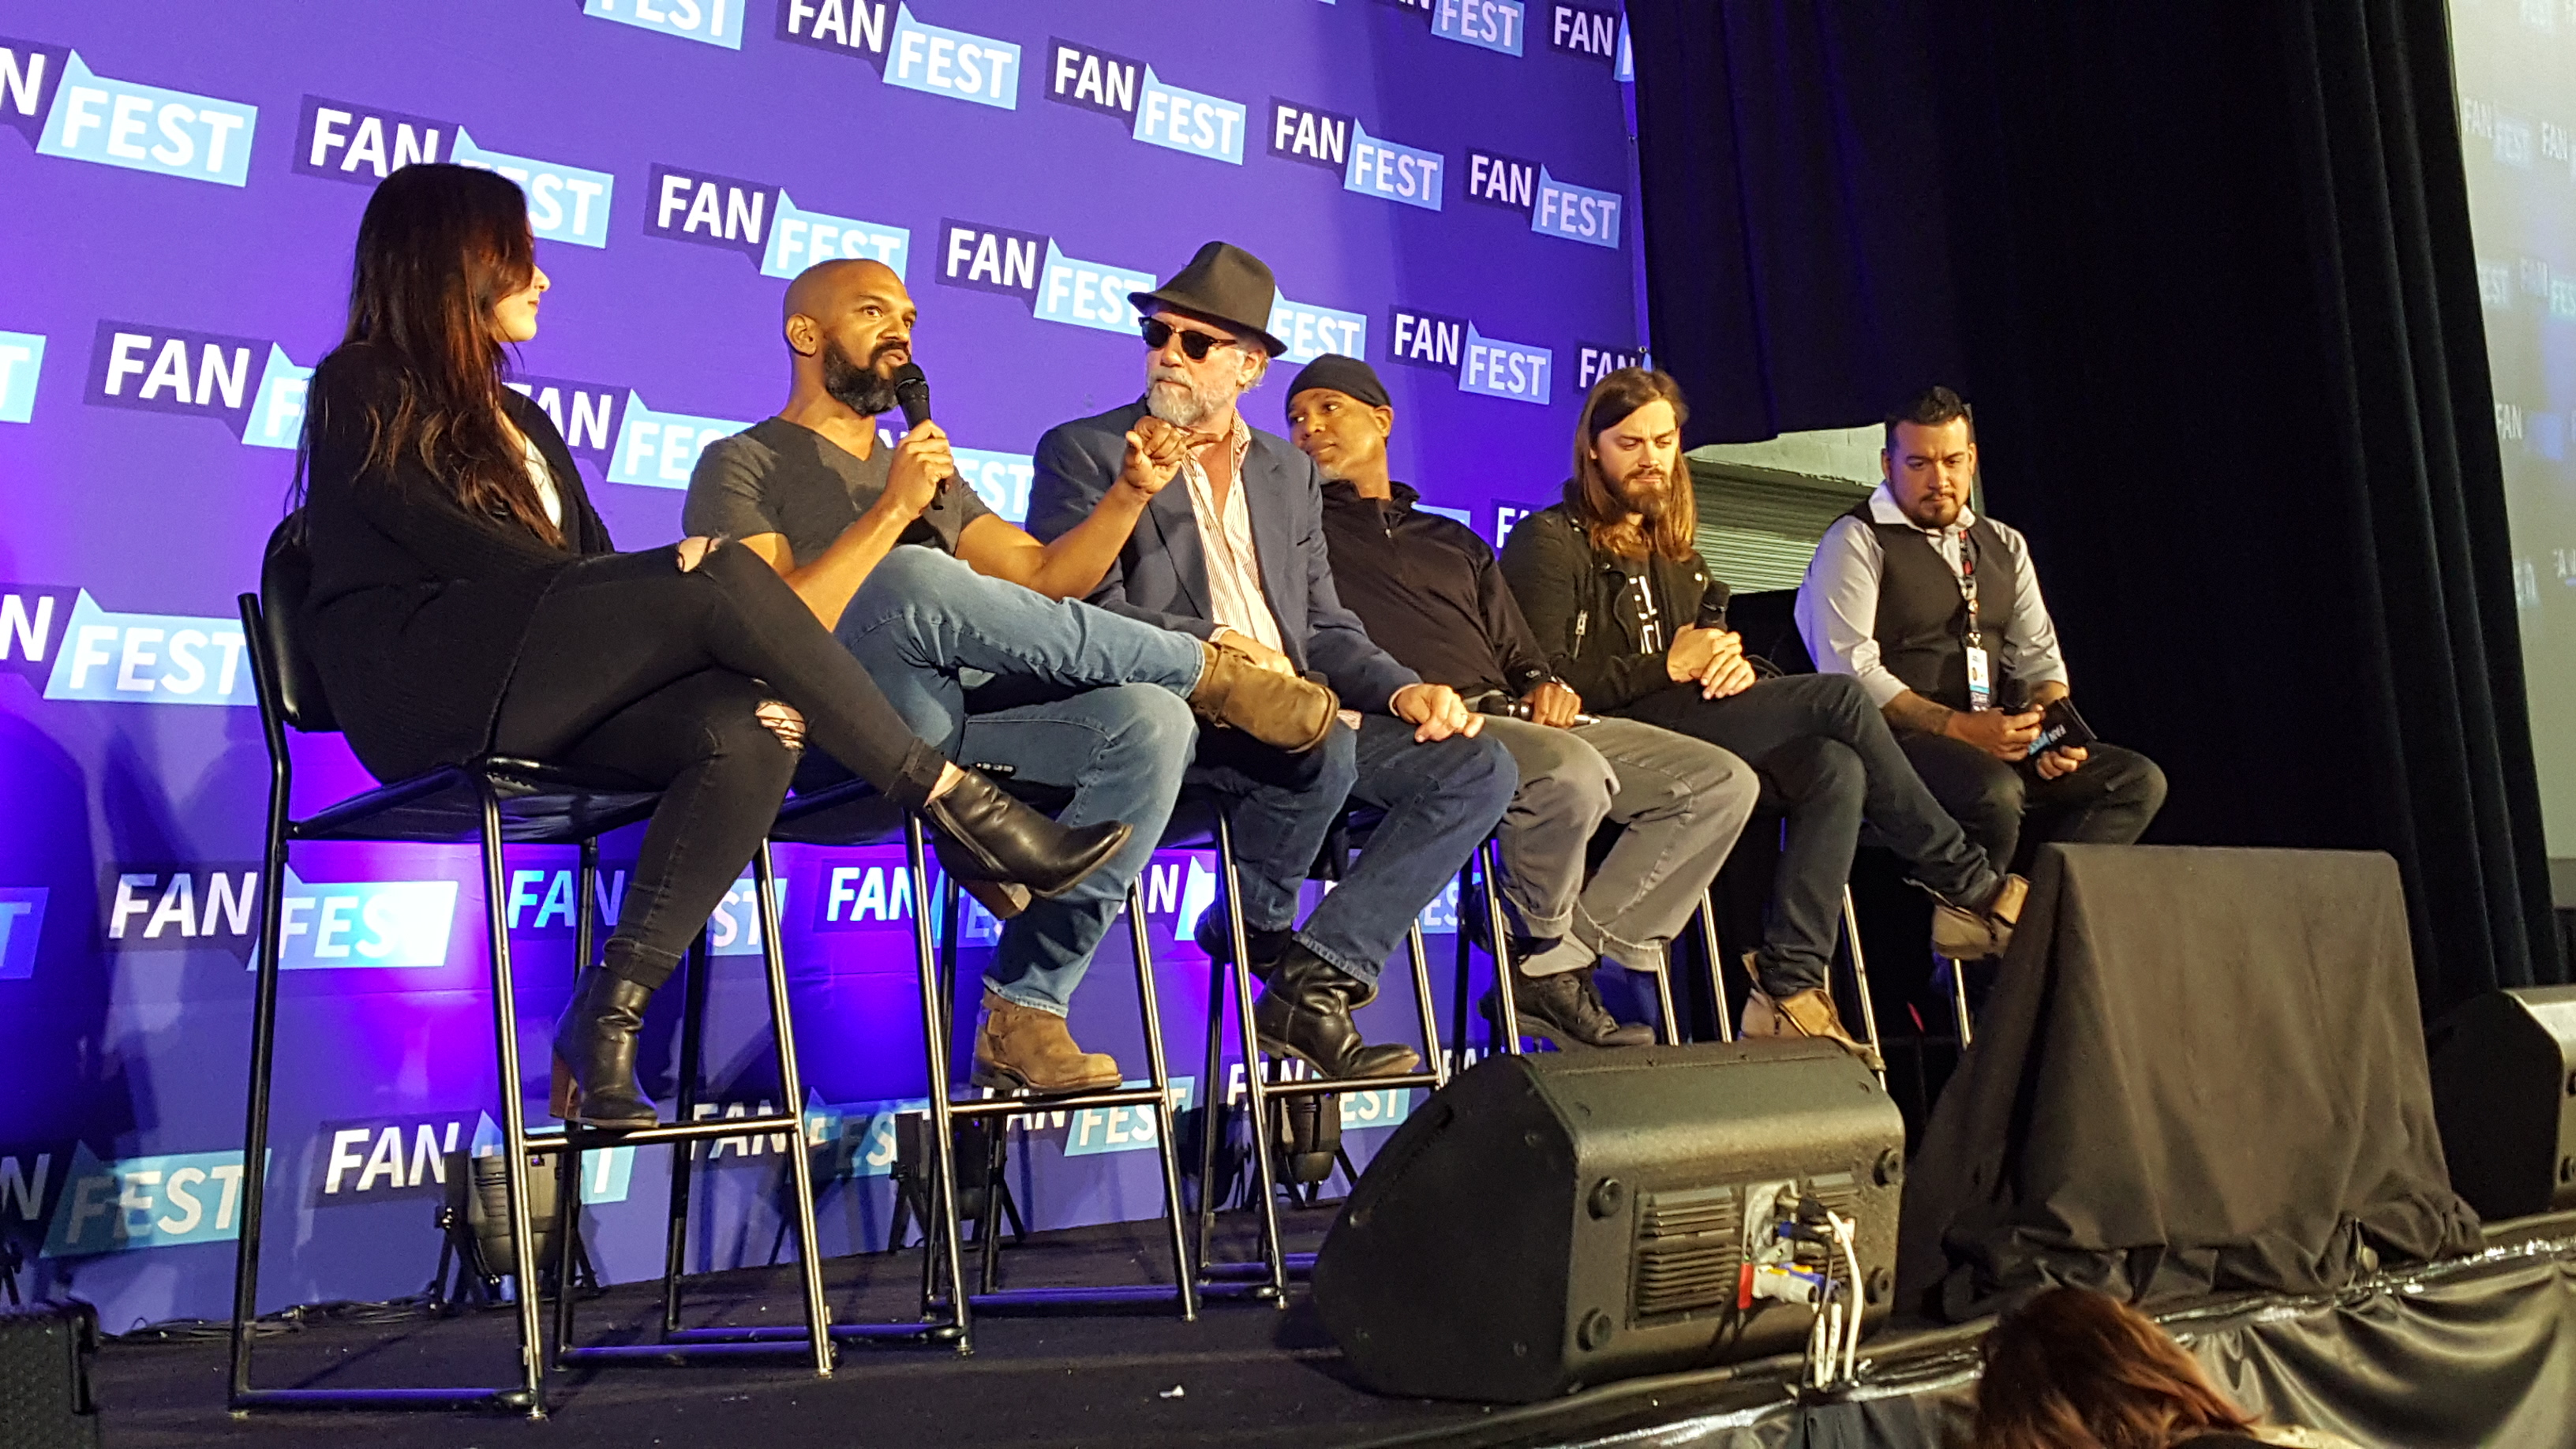 Khary Payton, Fan Fest Chicago 2017, The Walking Dead, Church and State Panel